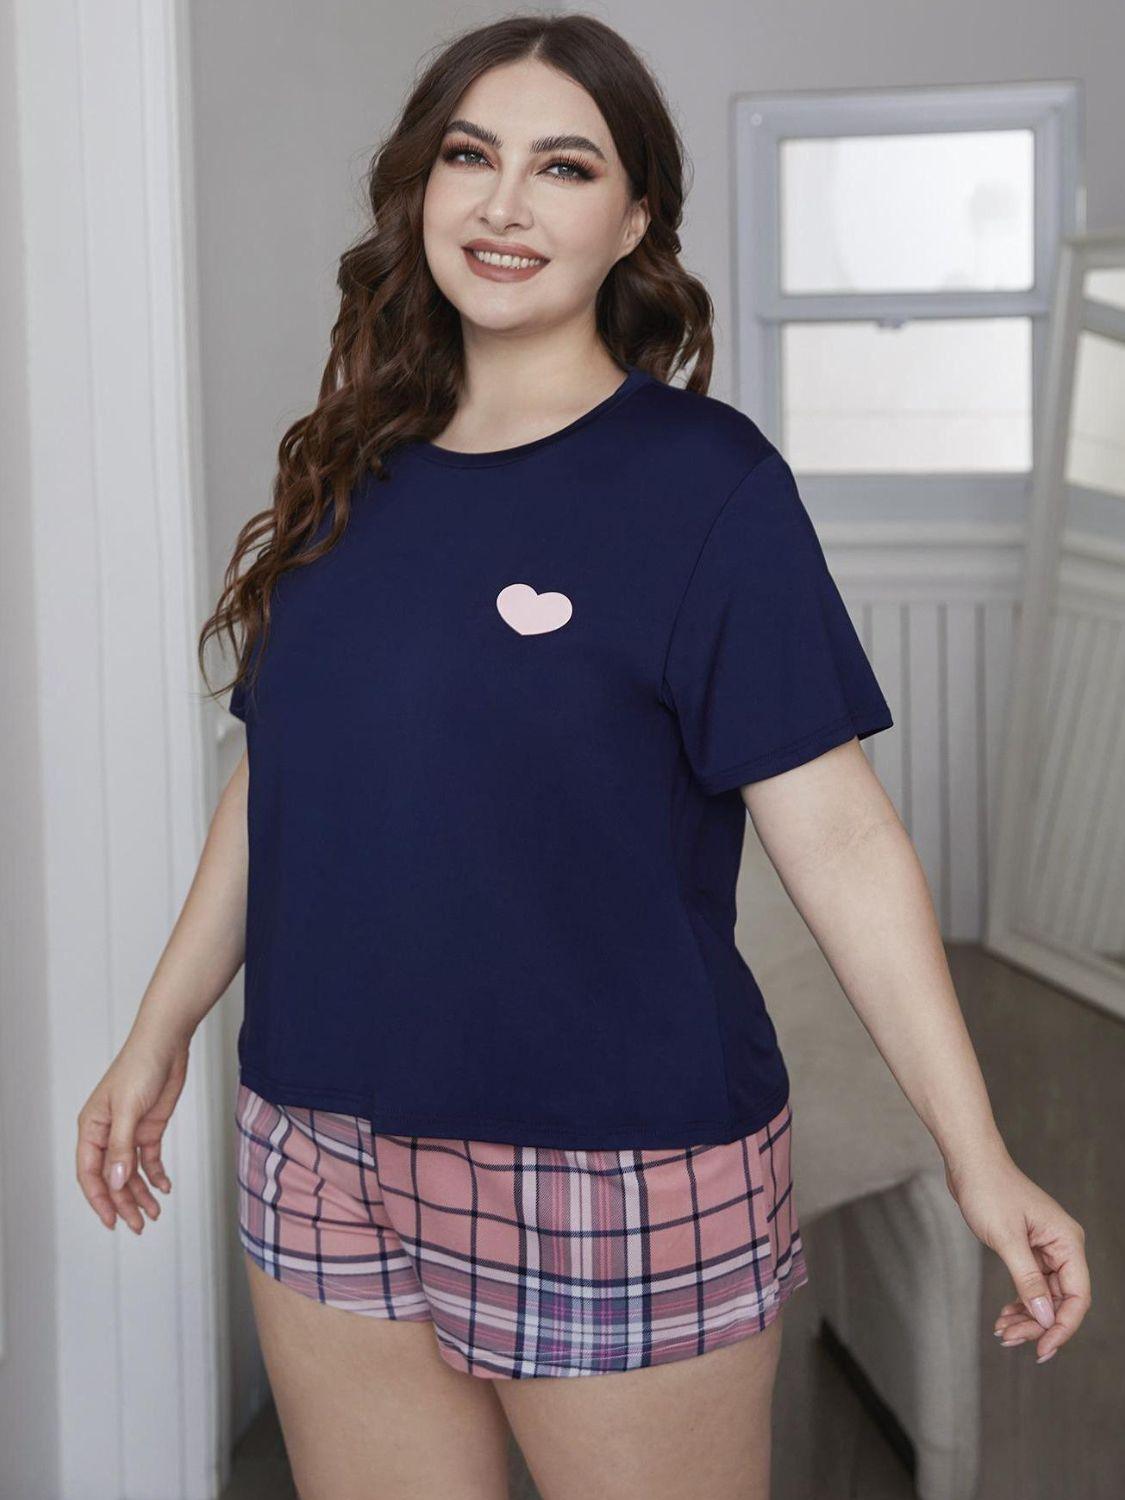 Plus Size Heart Graphic Top and Plaid Shorts Loungewear Set - Flyclothing LLC